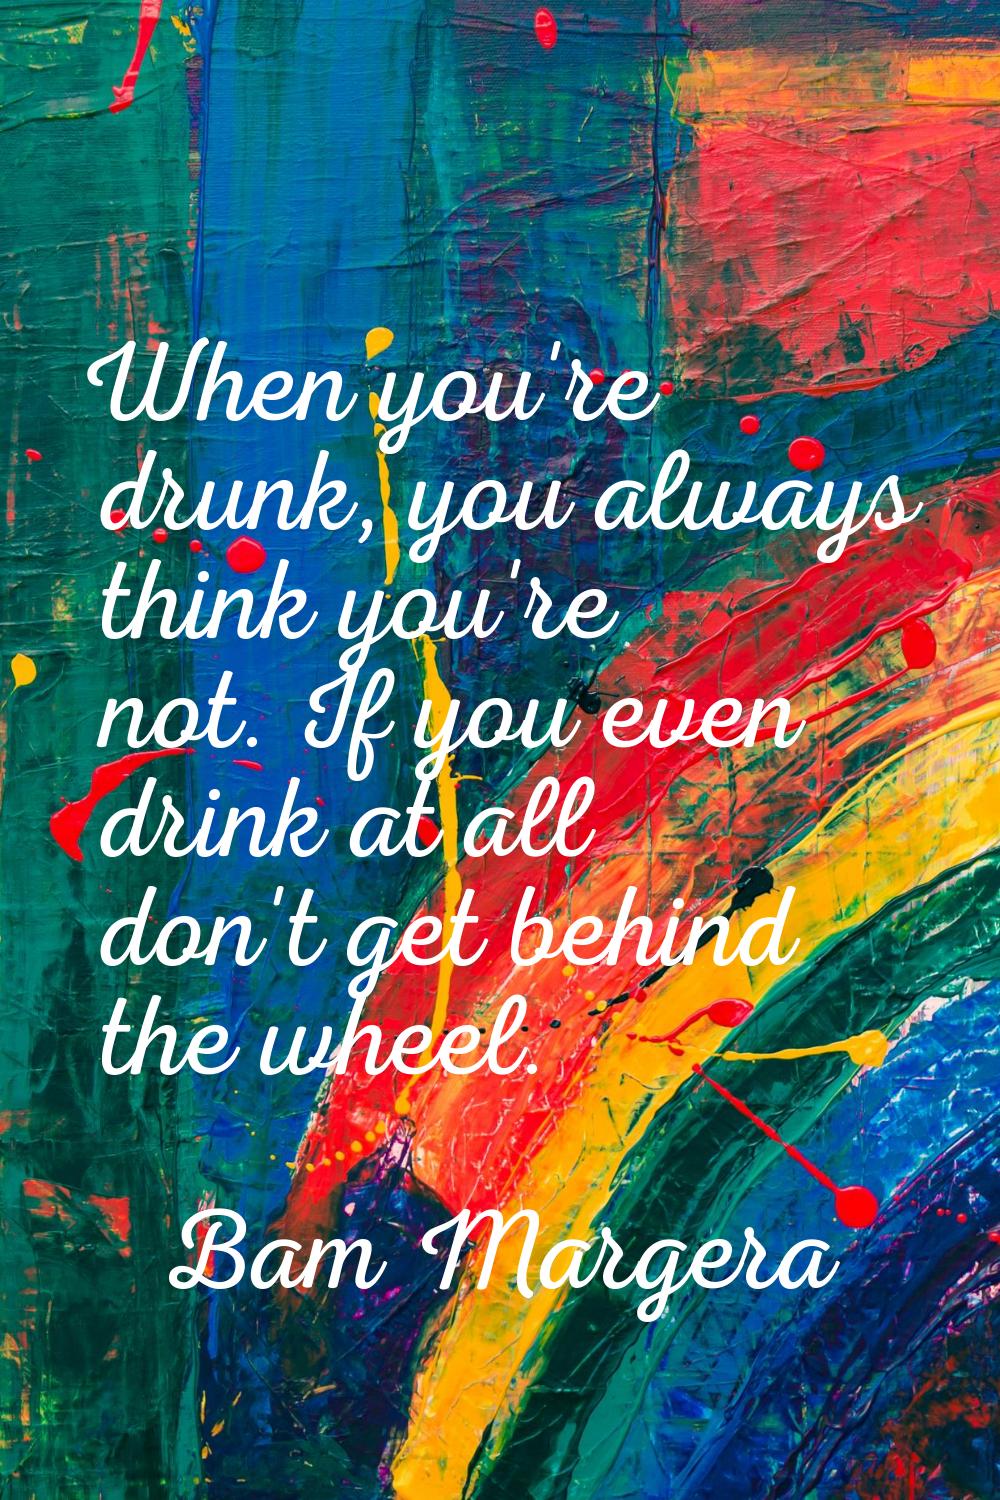 When you're drunk, you always think you're not. If you even drink at all don't get behind the wheel